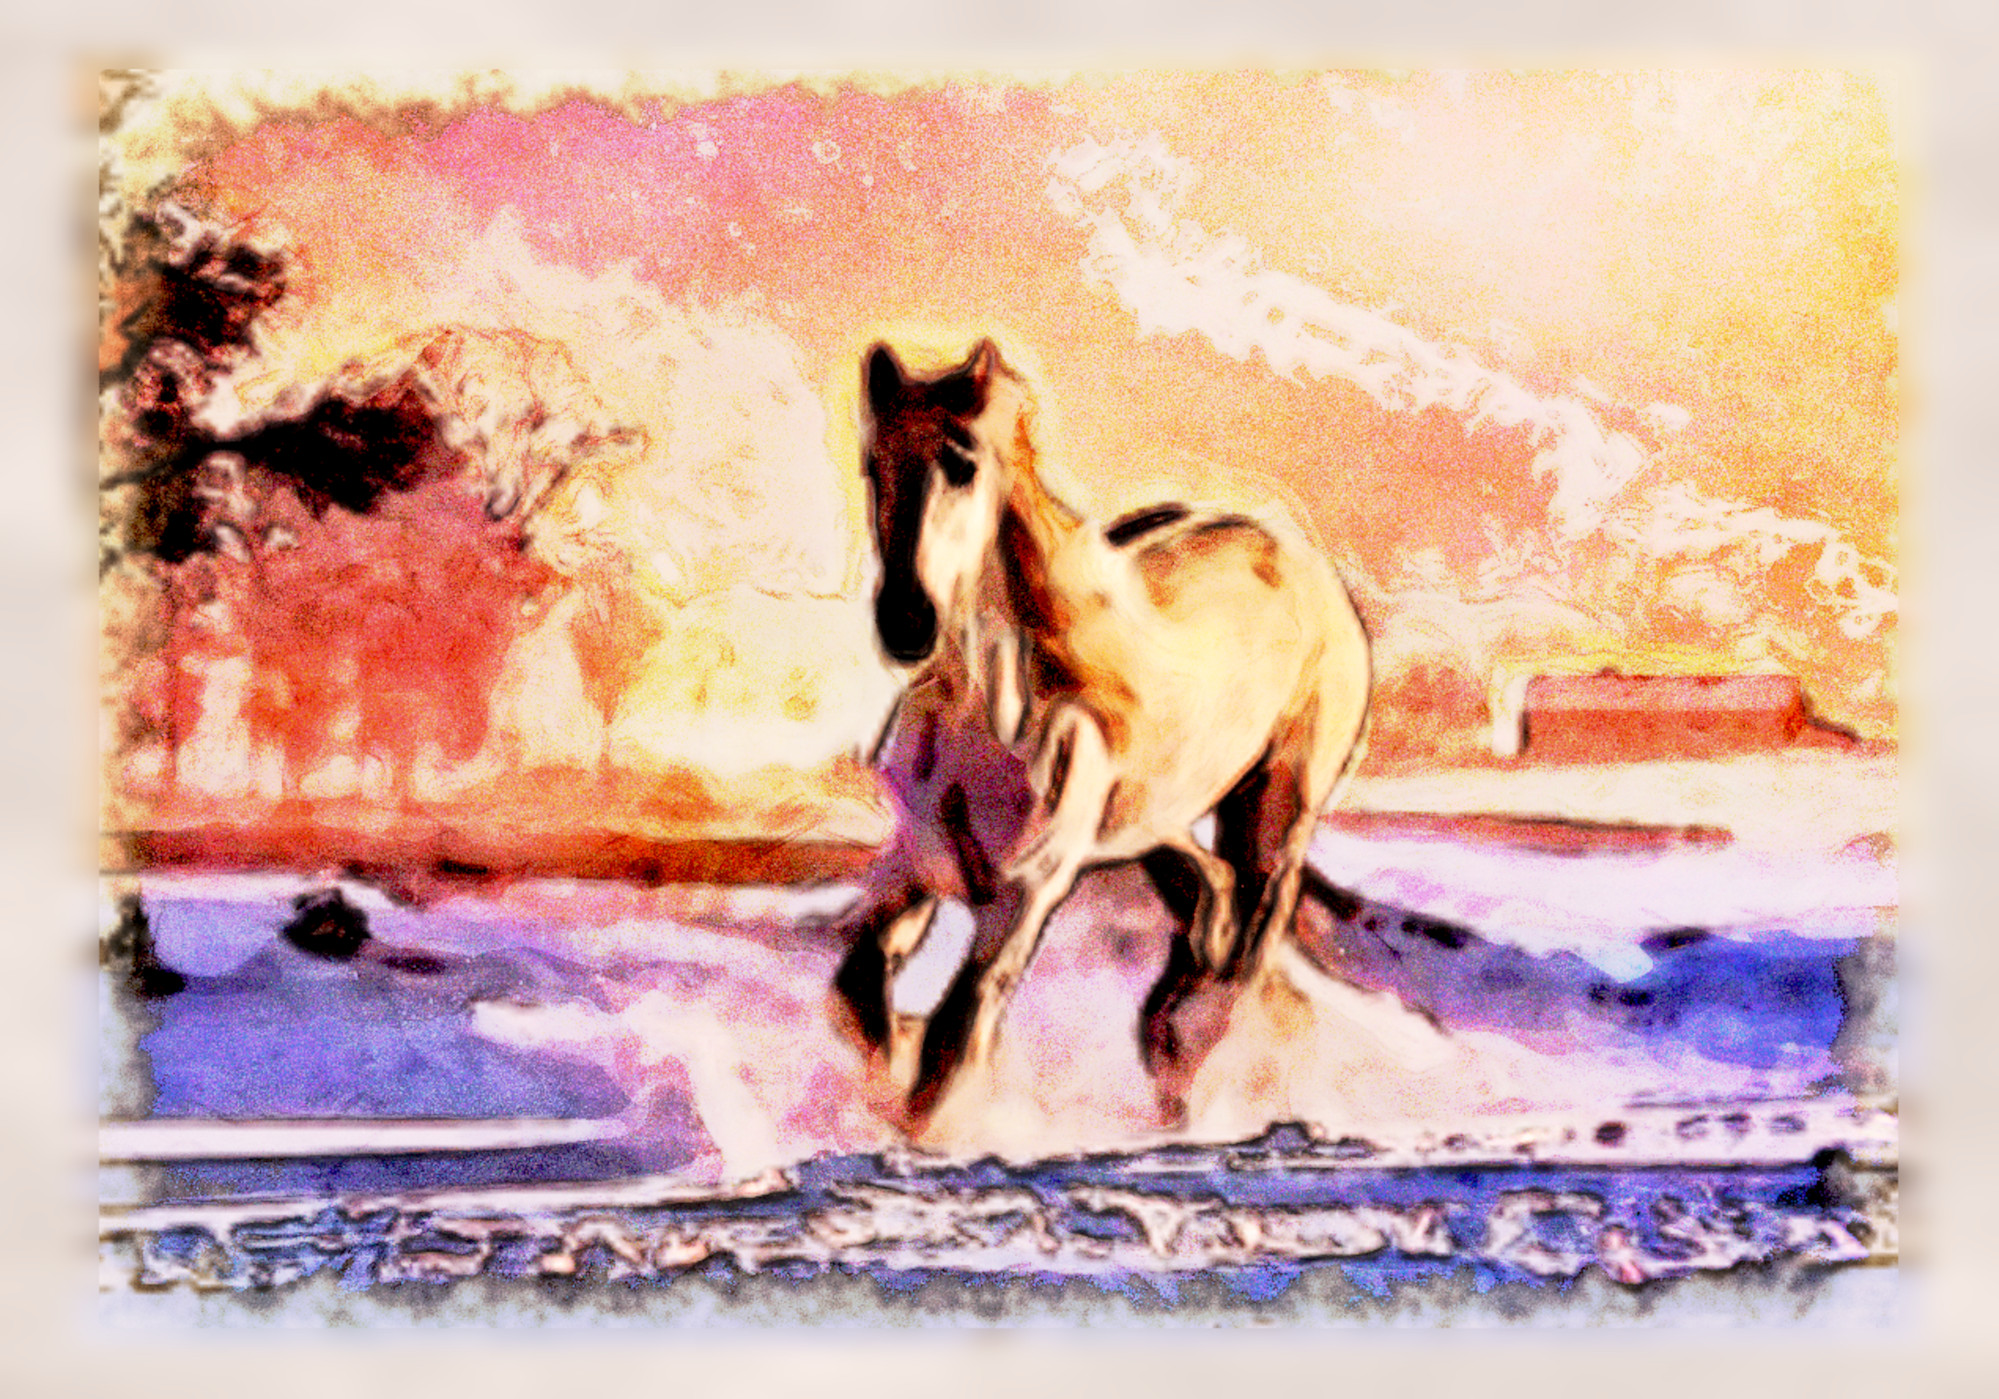 2023-09-30 12-37-40 white-horse-3010129 with a Watercolor Pastels Effect 2023 (4.0,75.0,32.0,50.0,10.0,8.0,75.0,True,2).jpg